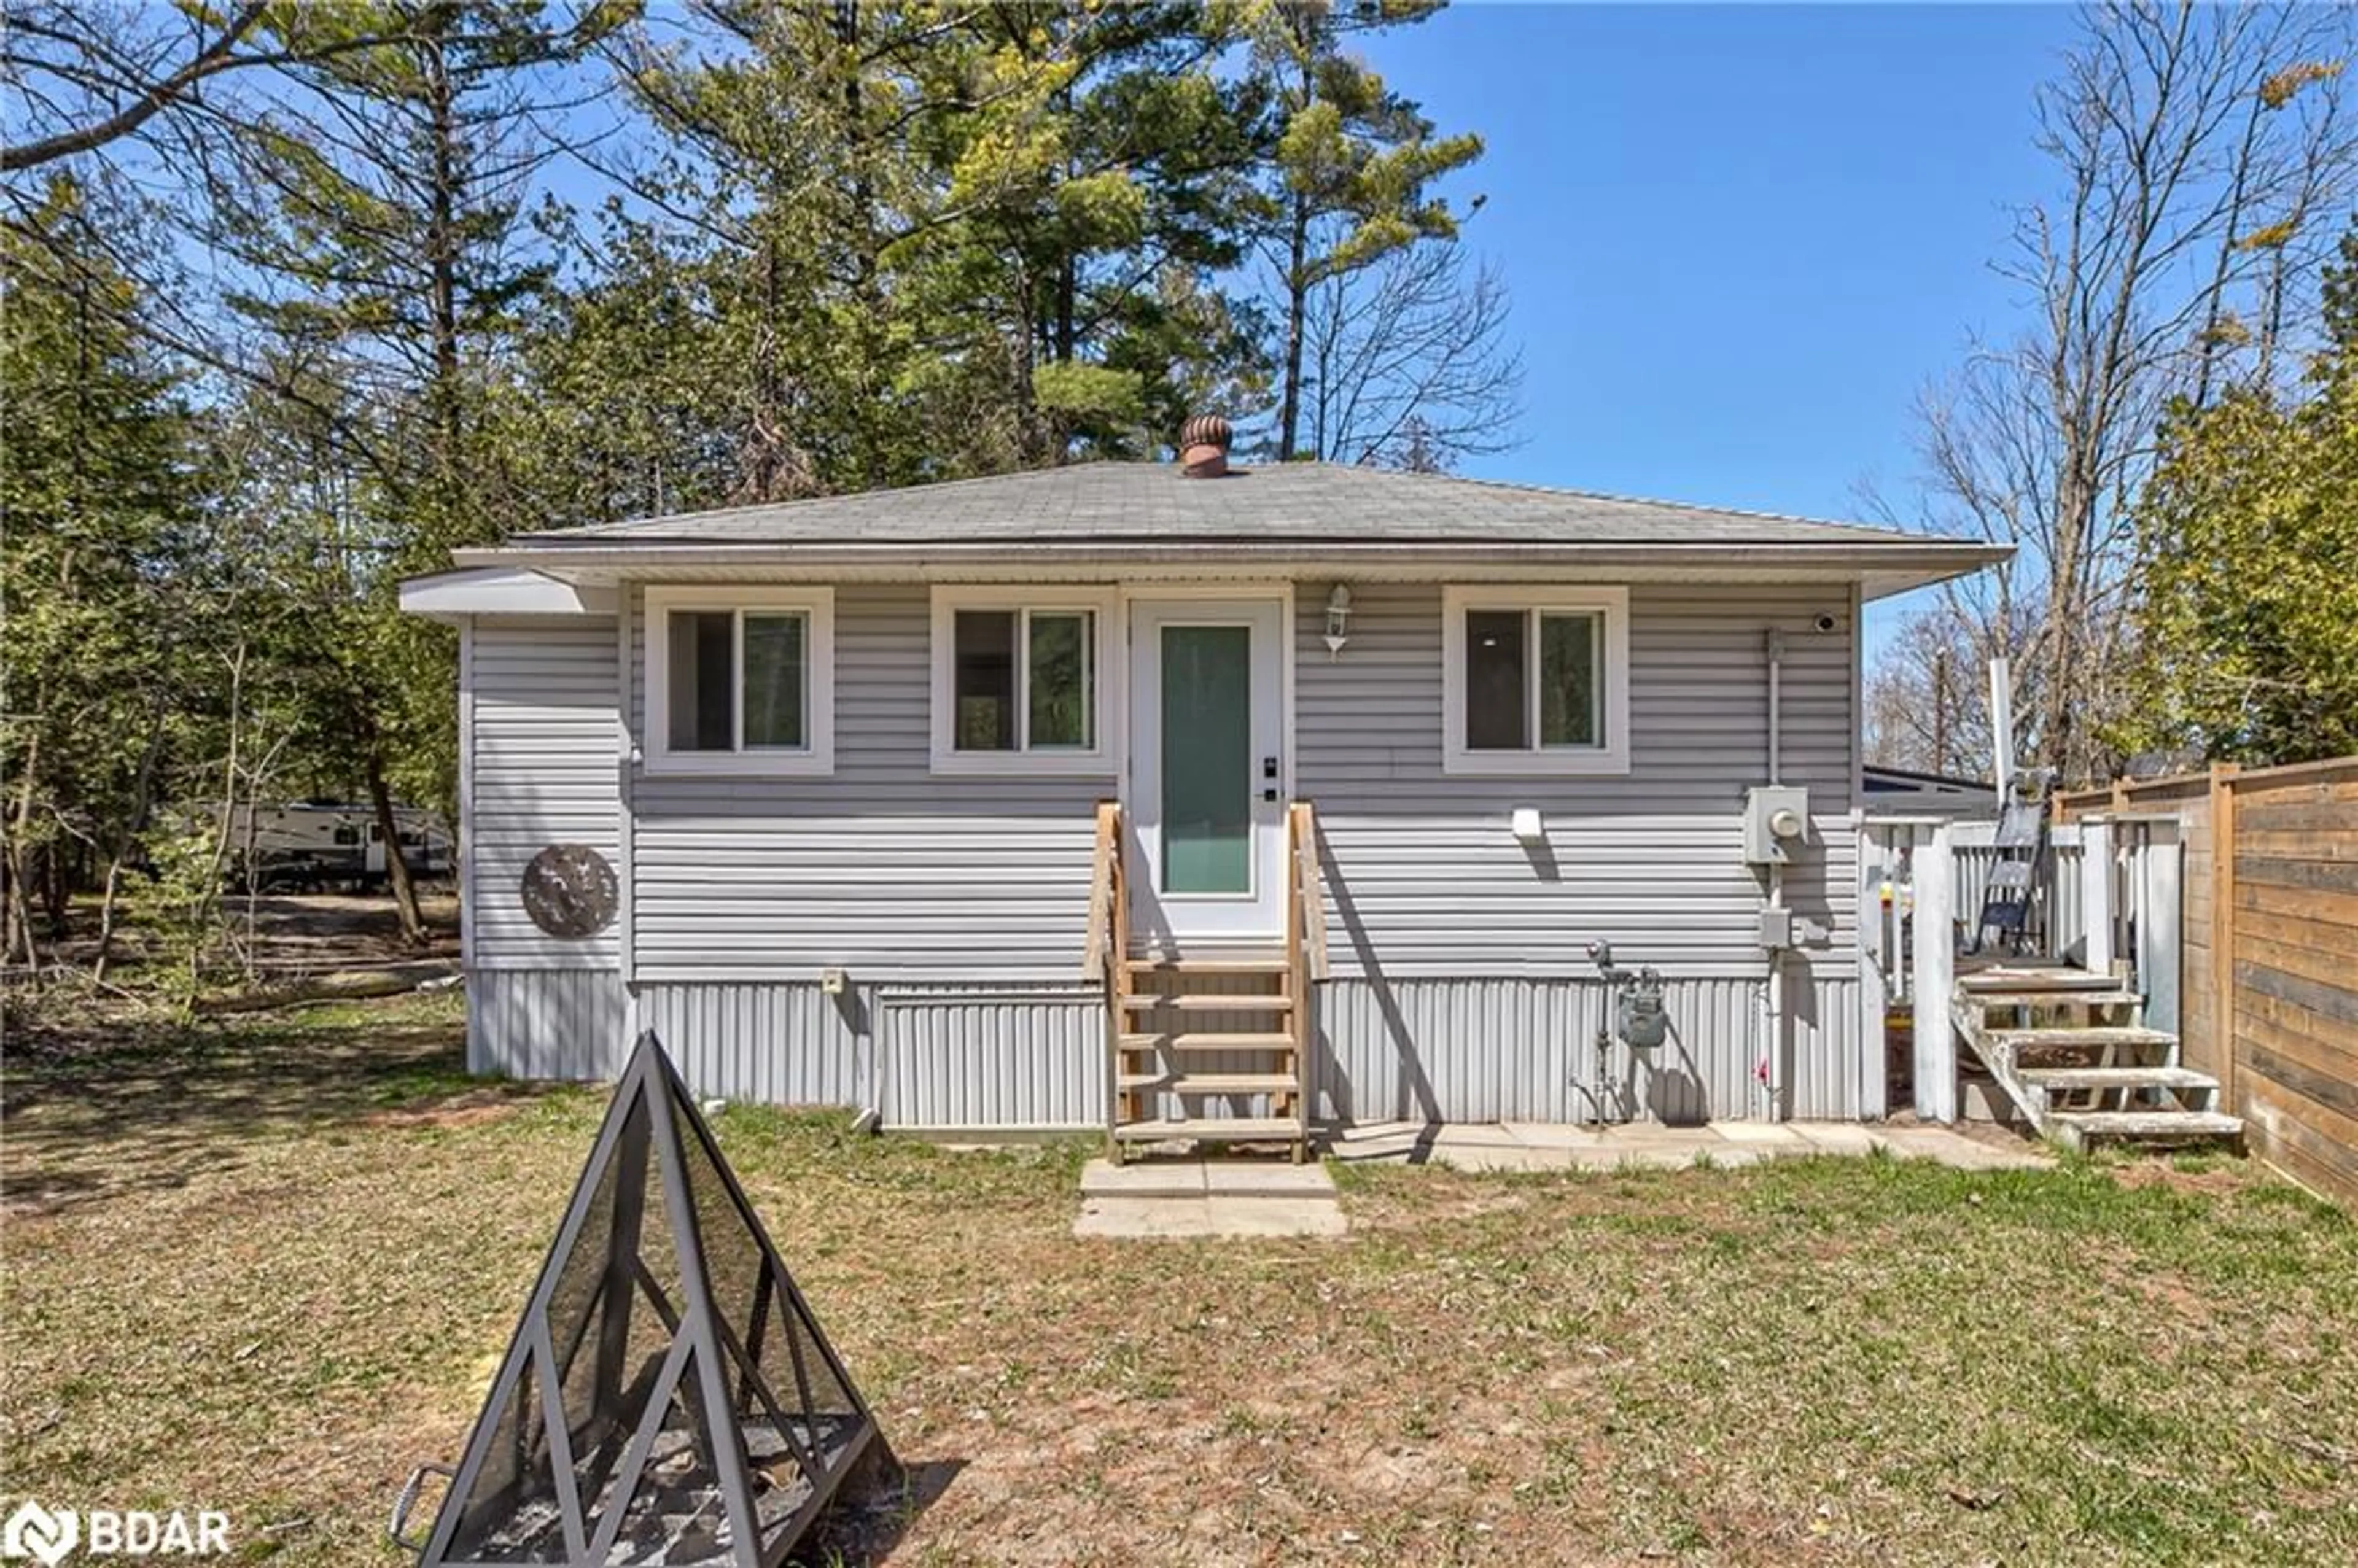 Cottage for 56 Homewood Ave, Wasaga Beach Ontario L9Z 2M2